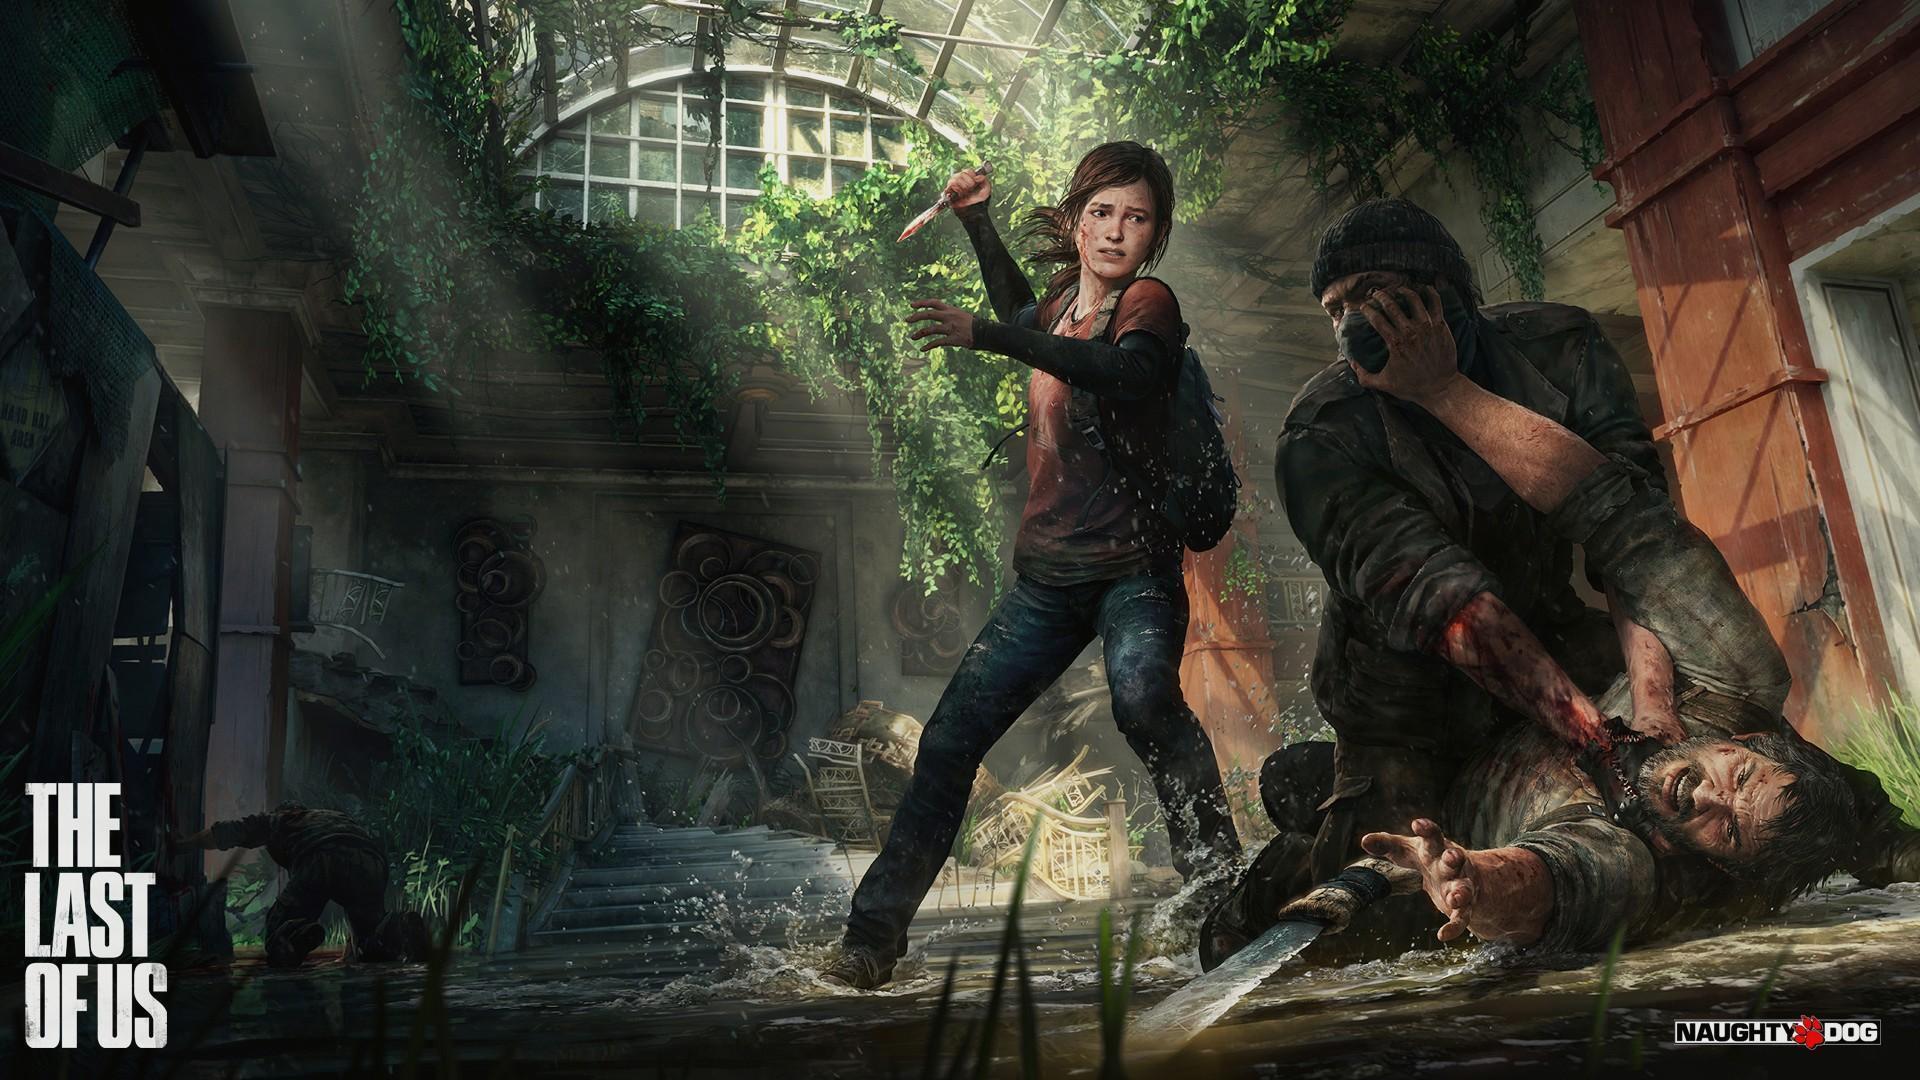 The Last Of Us Wallpaper HD Download